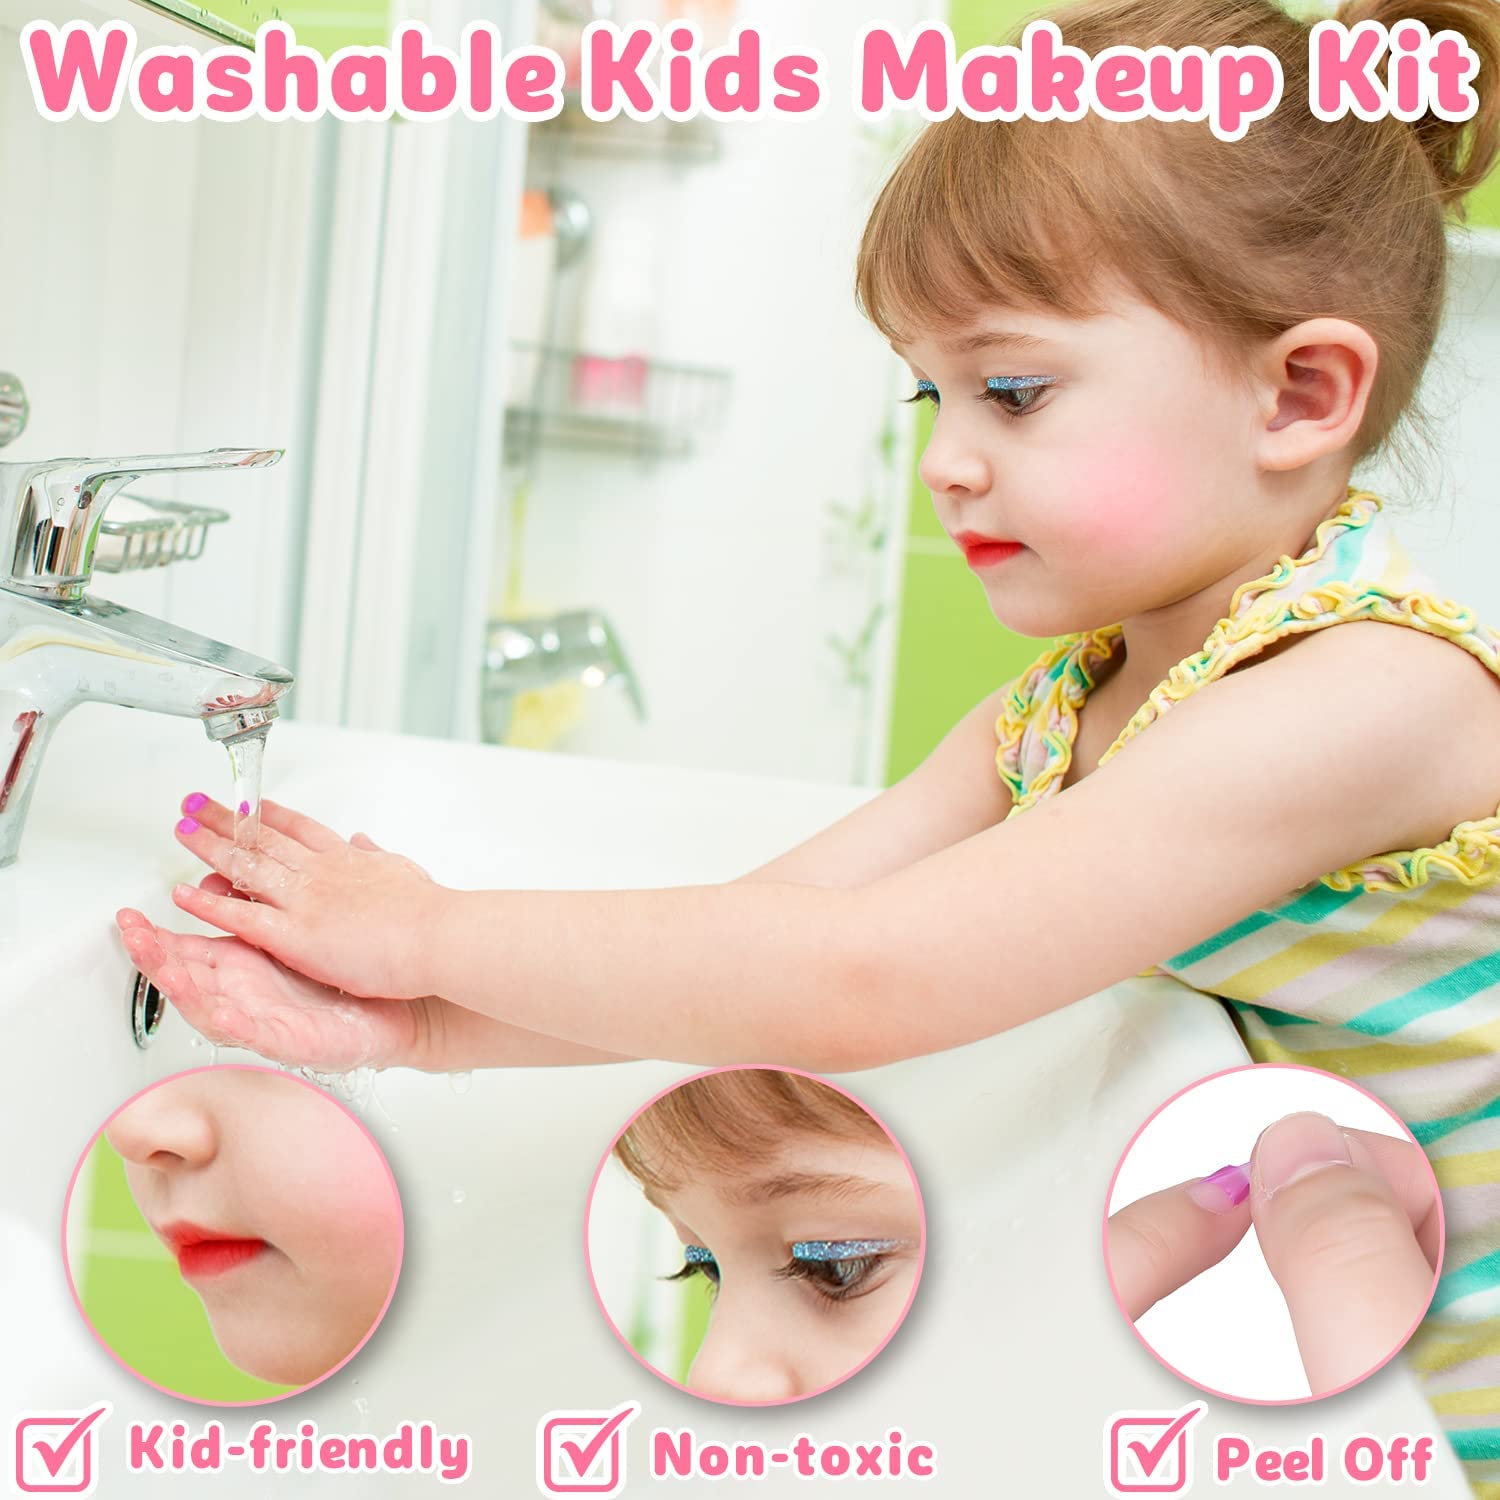 56 Pcs Real Kids Makeup Kit for Girls, Washable Pretend Play